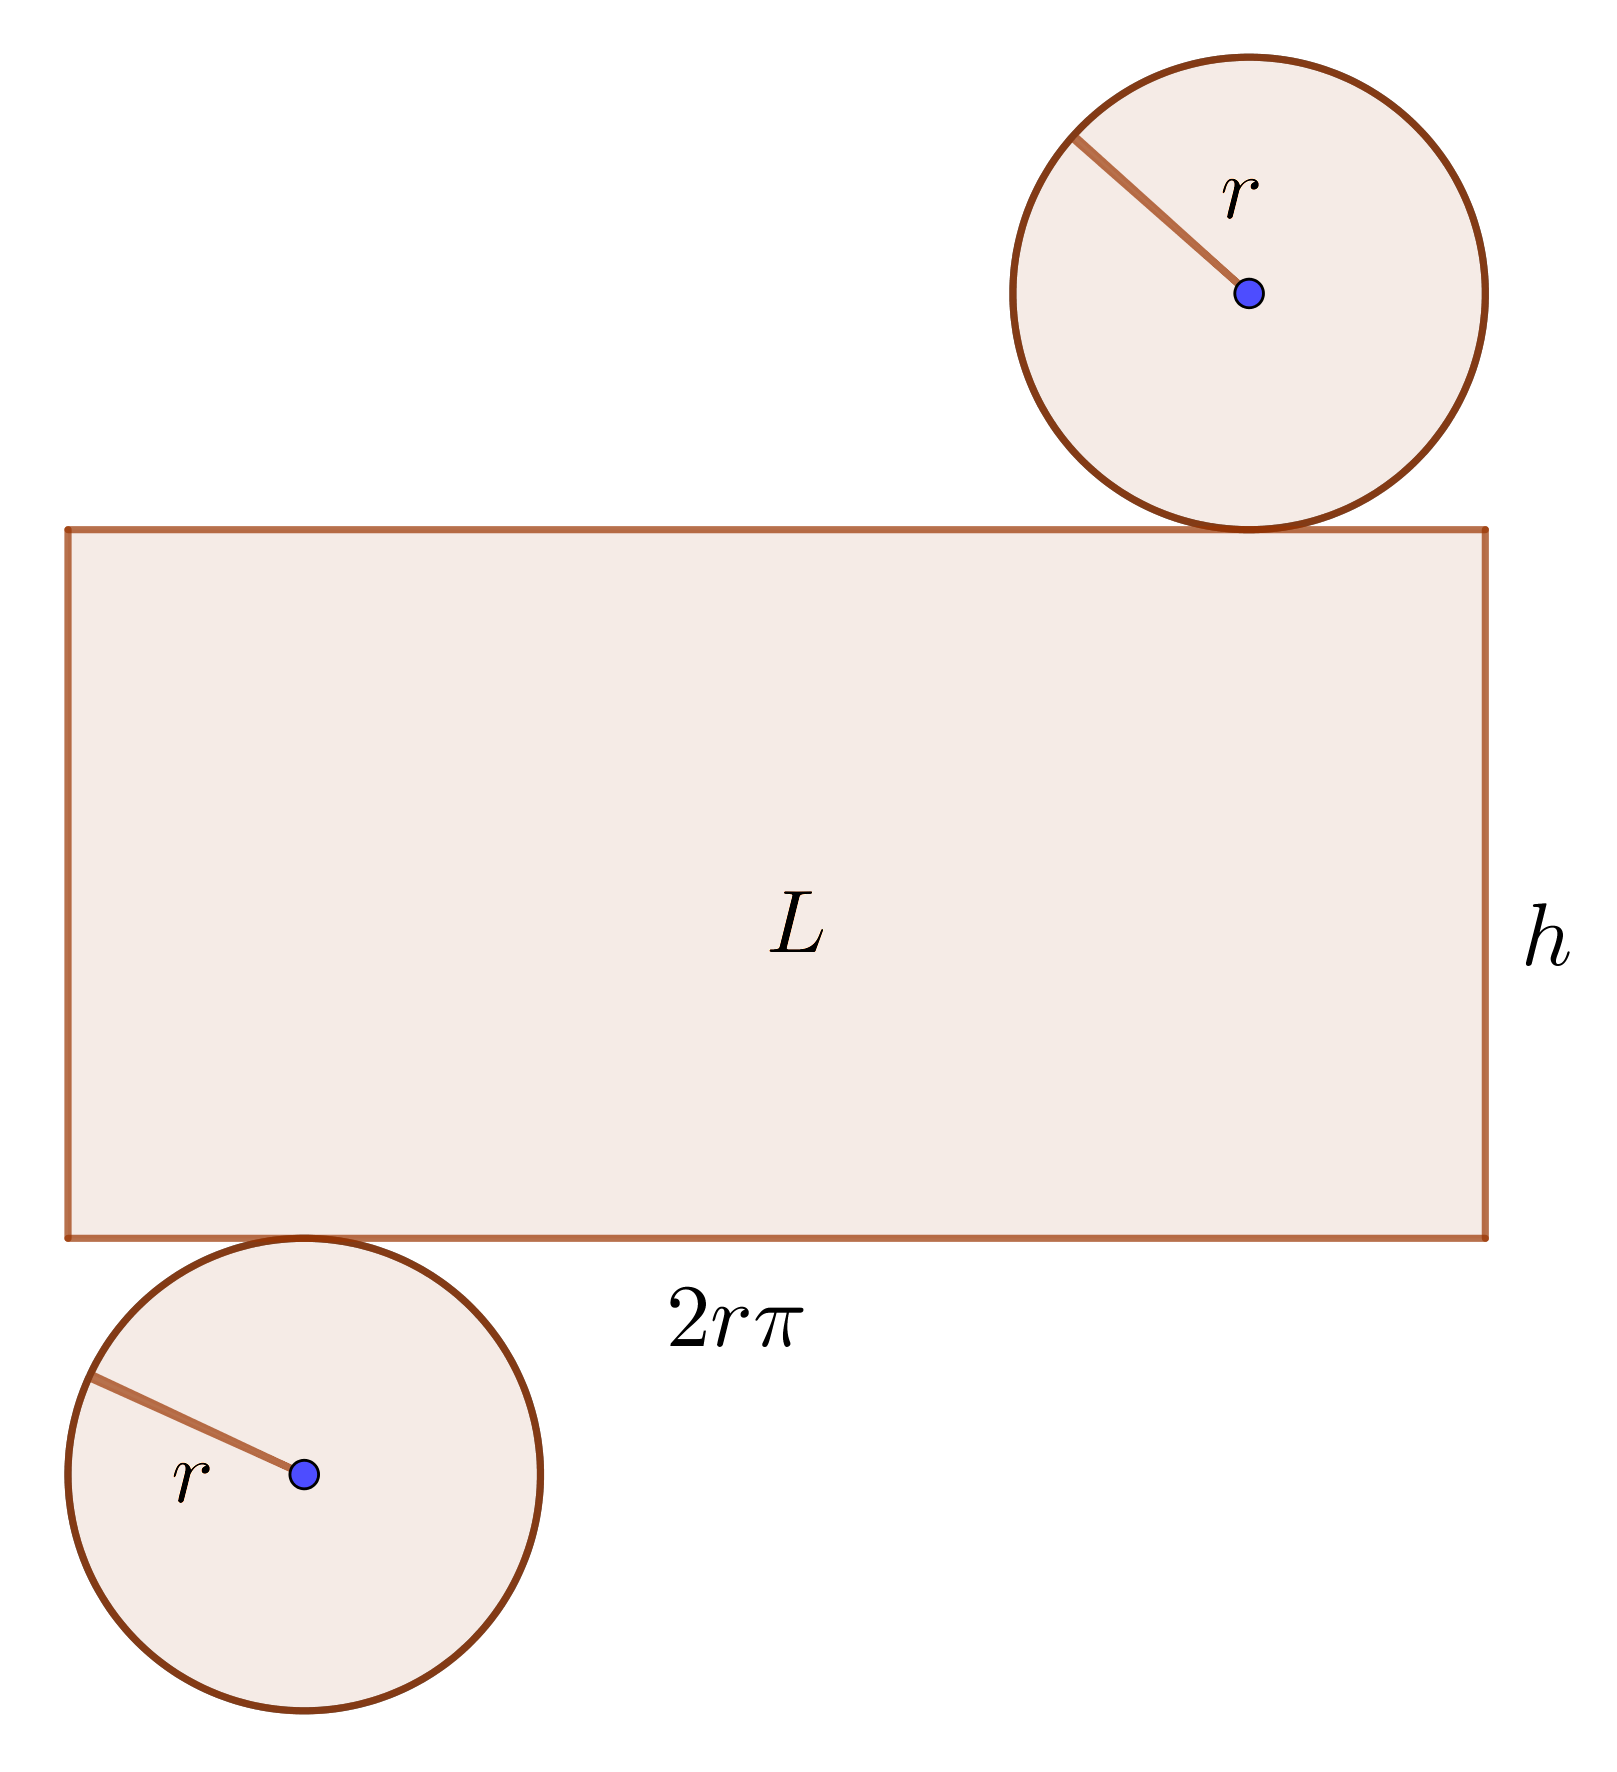 circle and rectangle vs cylinder relationship